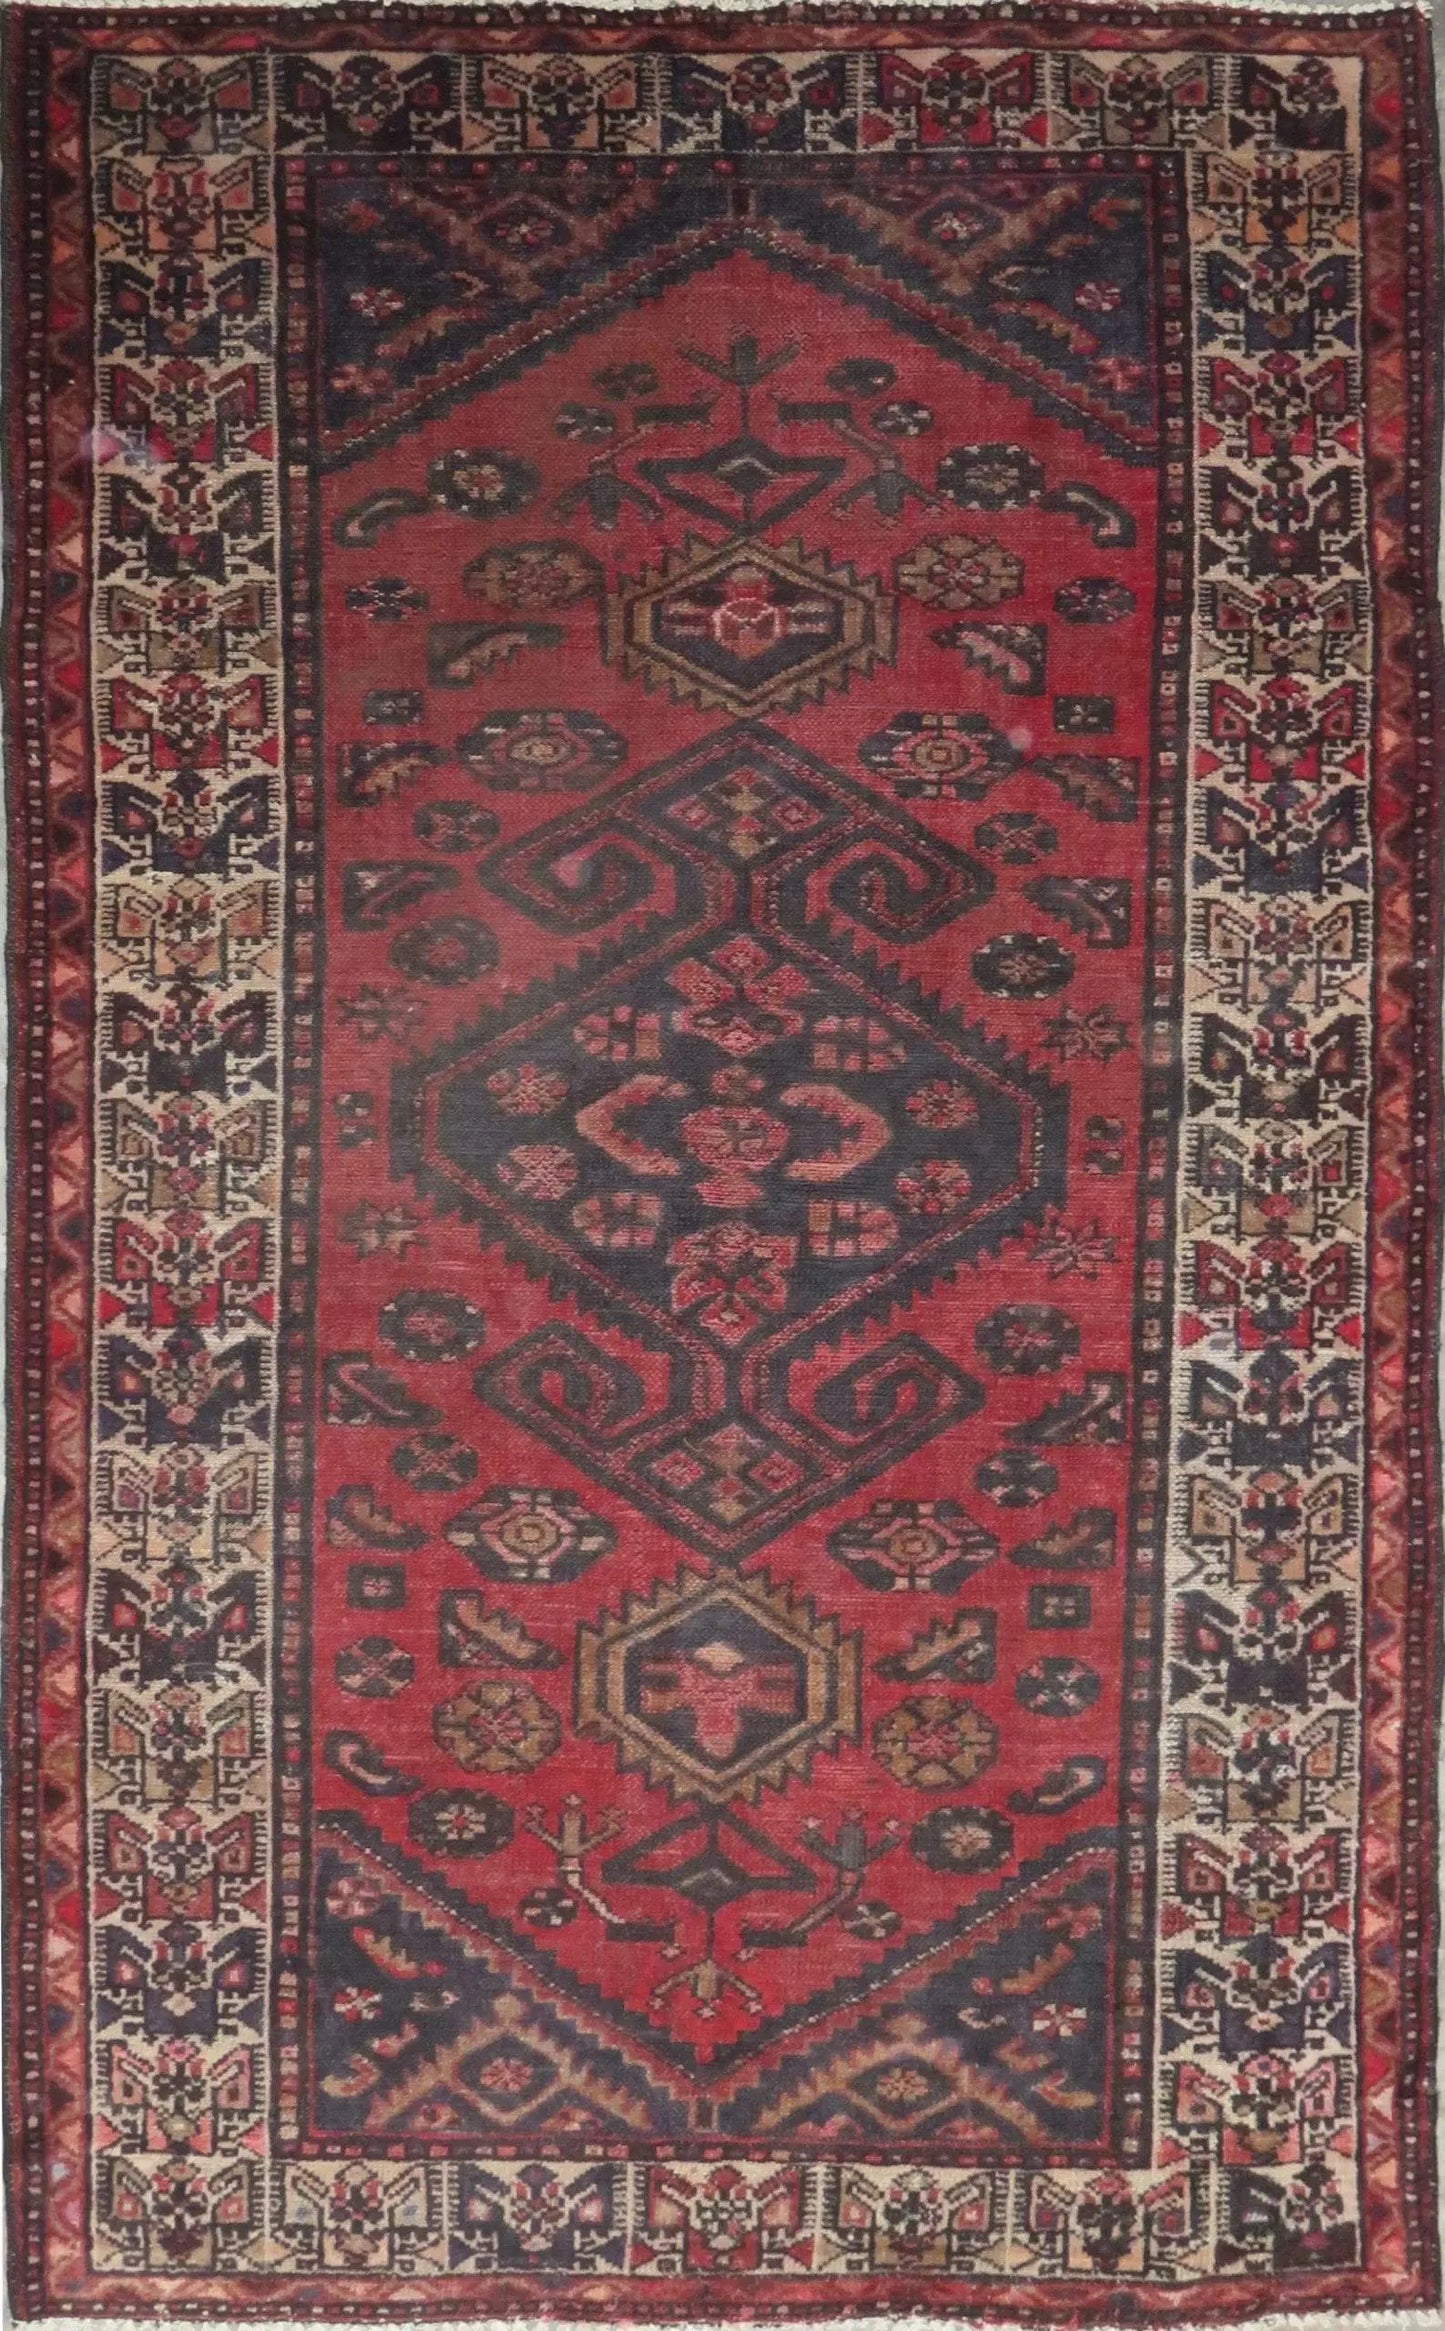 Hand-Knotted Persian Wool Rug _ Luxurious Vintage Design, 6'8" x 4'1", Artisan Crafted